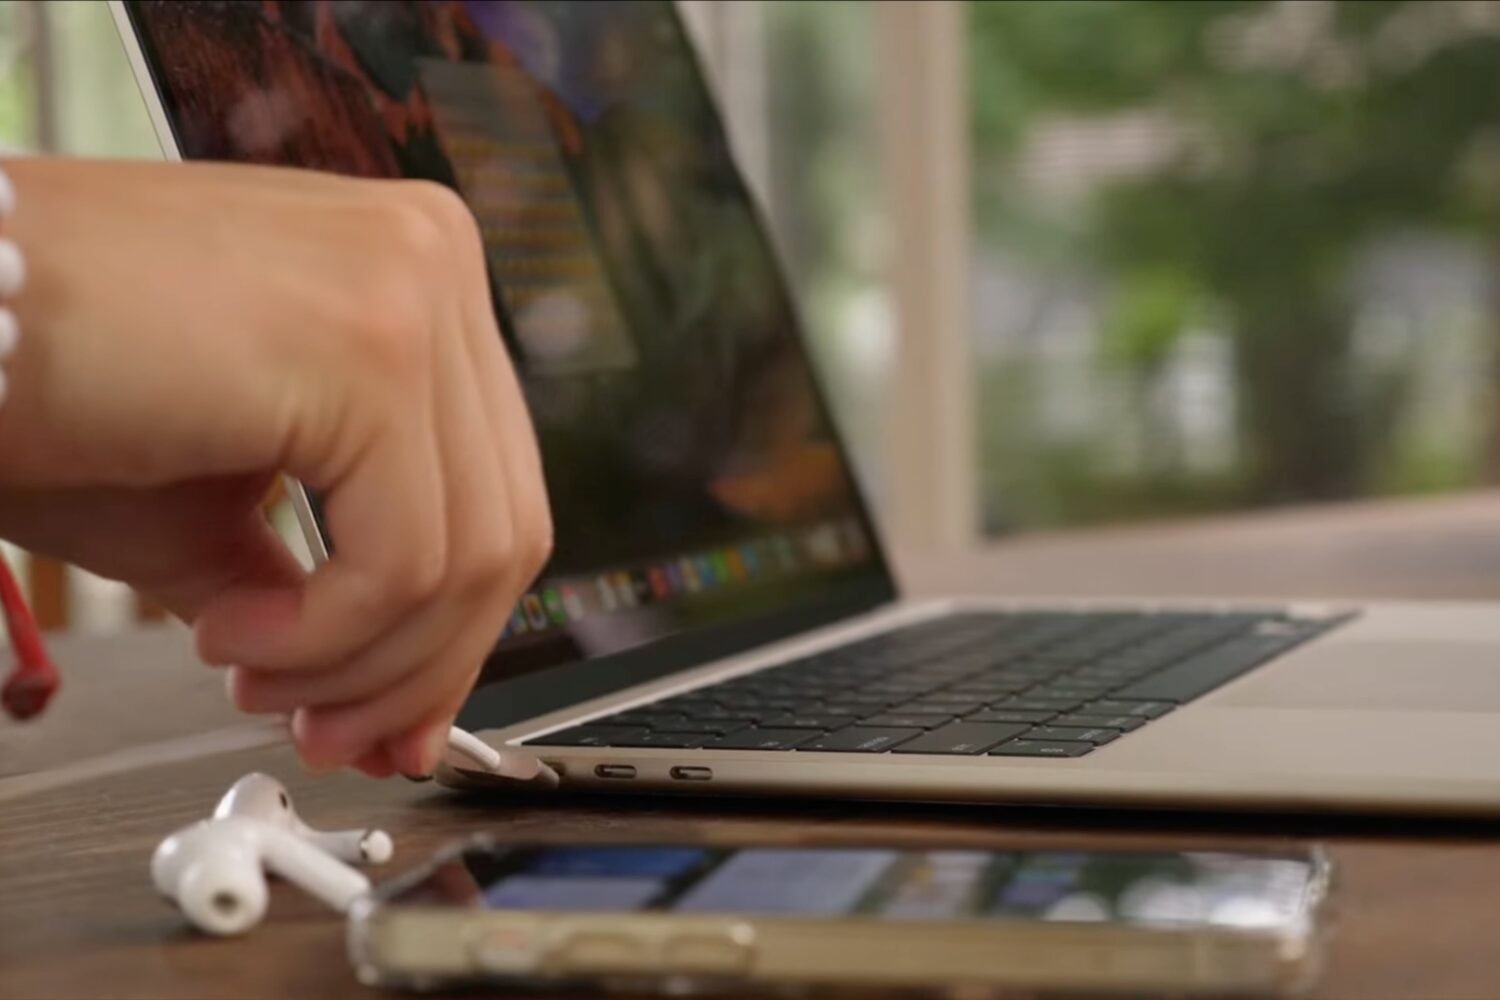 Male hand plugging a cable into the MacBook Air's MagSafe power port